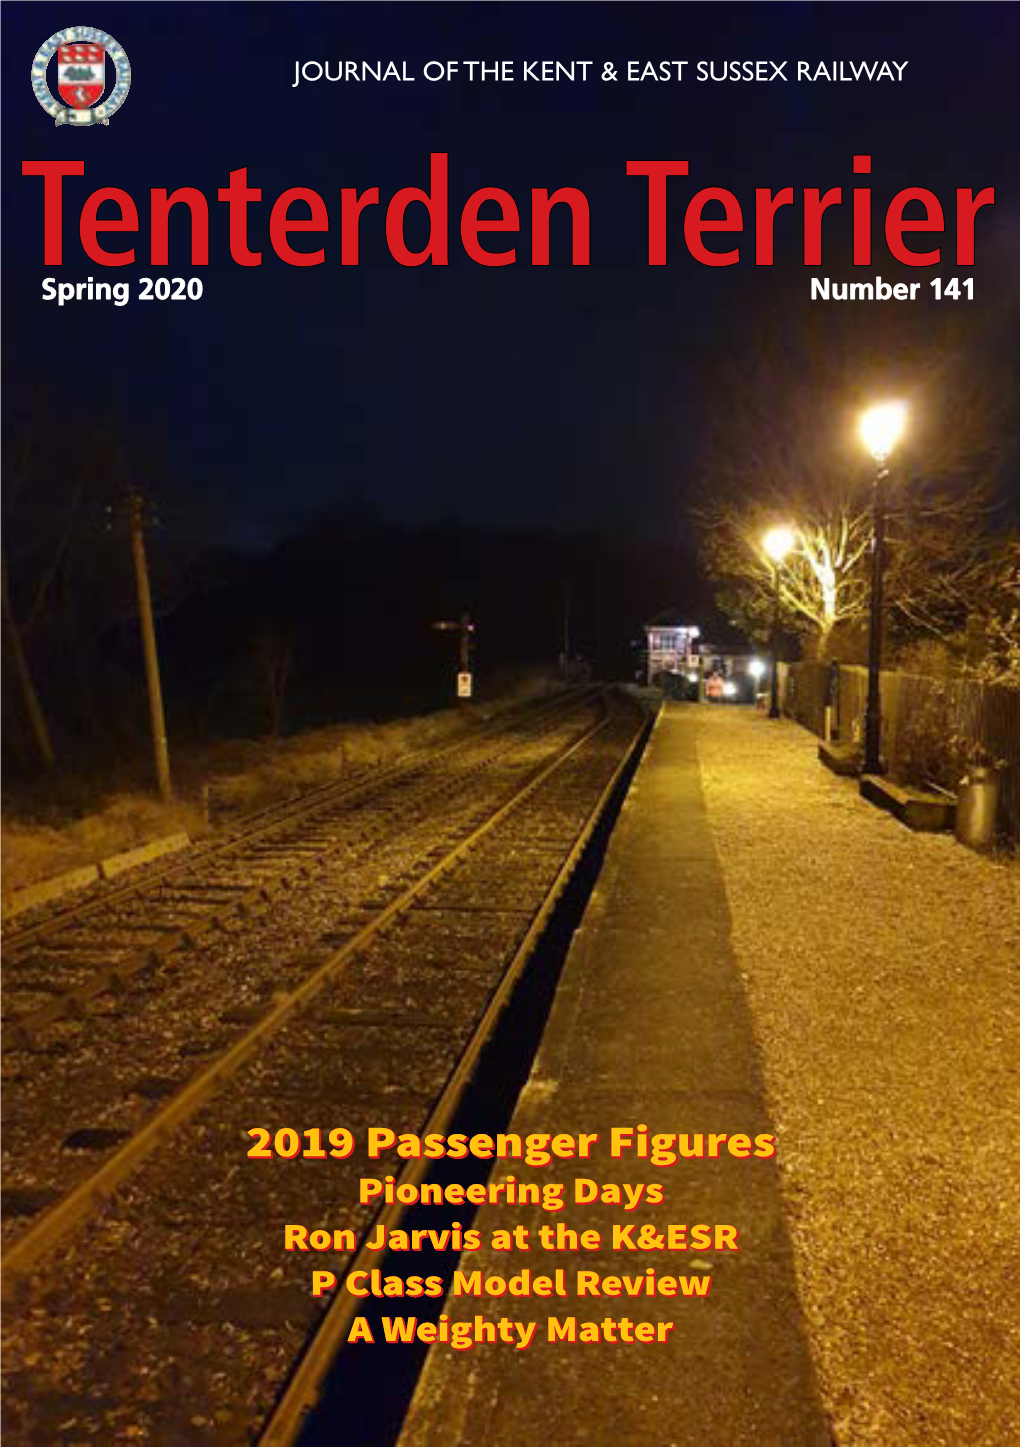 Tenterden Terrier Is Published by the Kent & East Sussex Railway Company Limited Three Times a Year on the Third Saturday of March, July and November